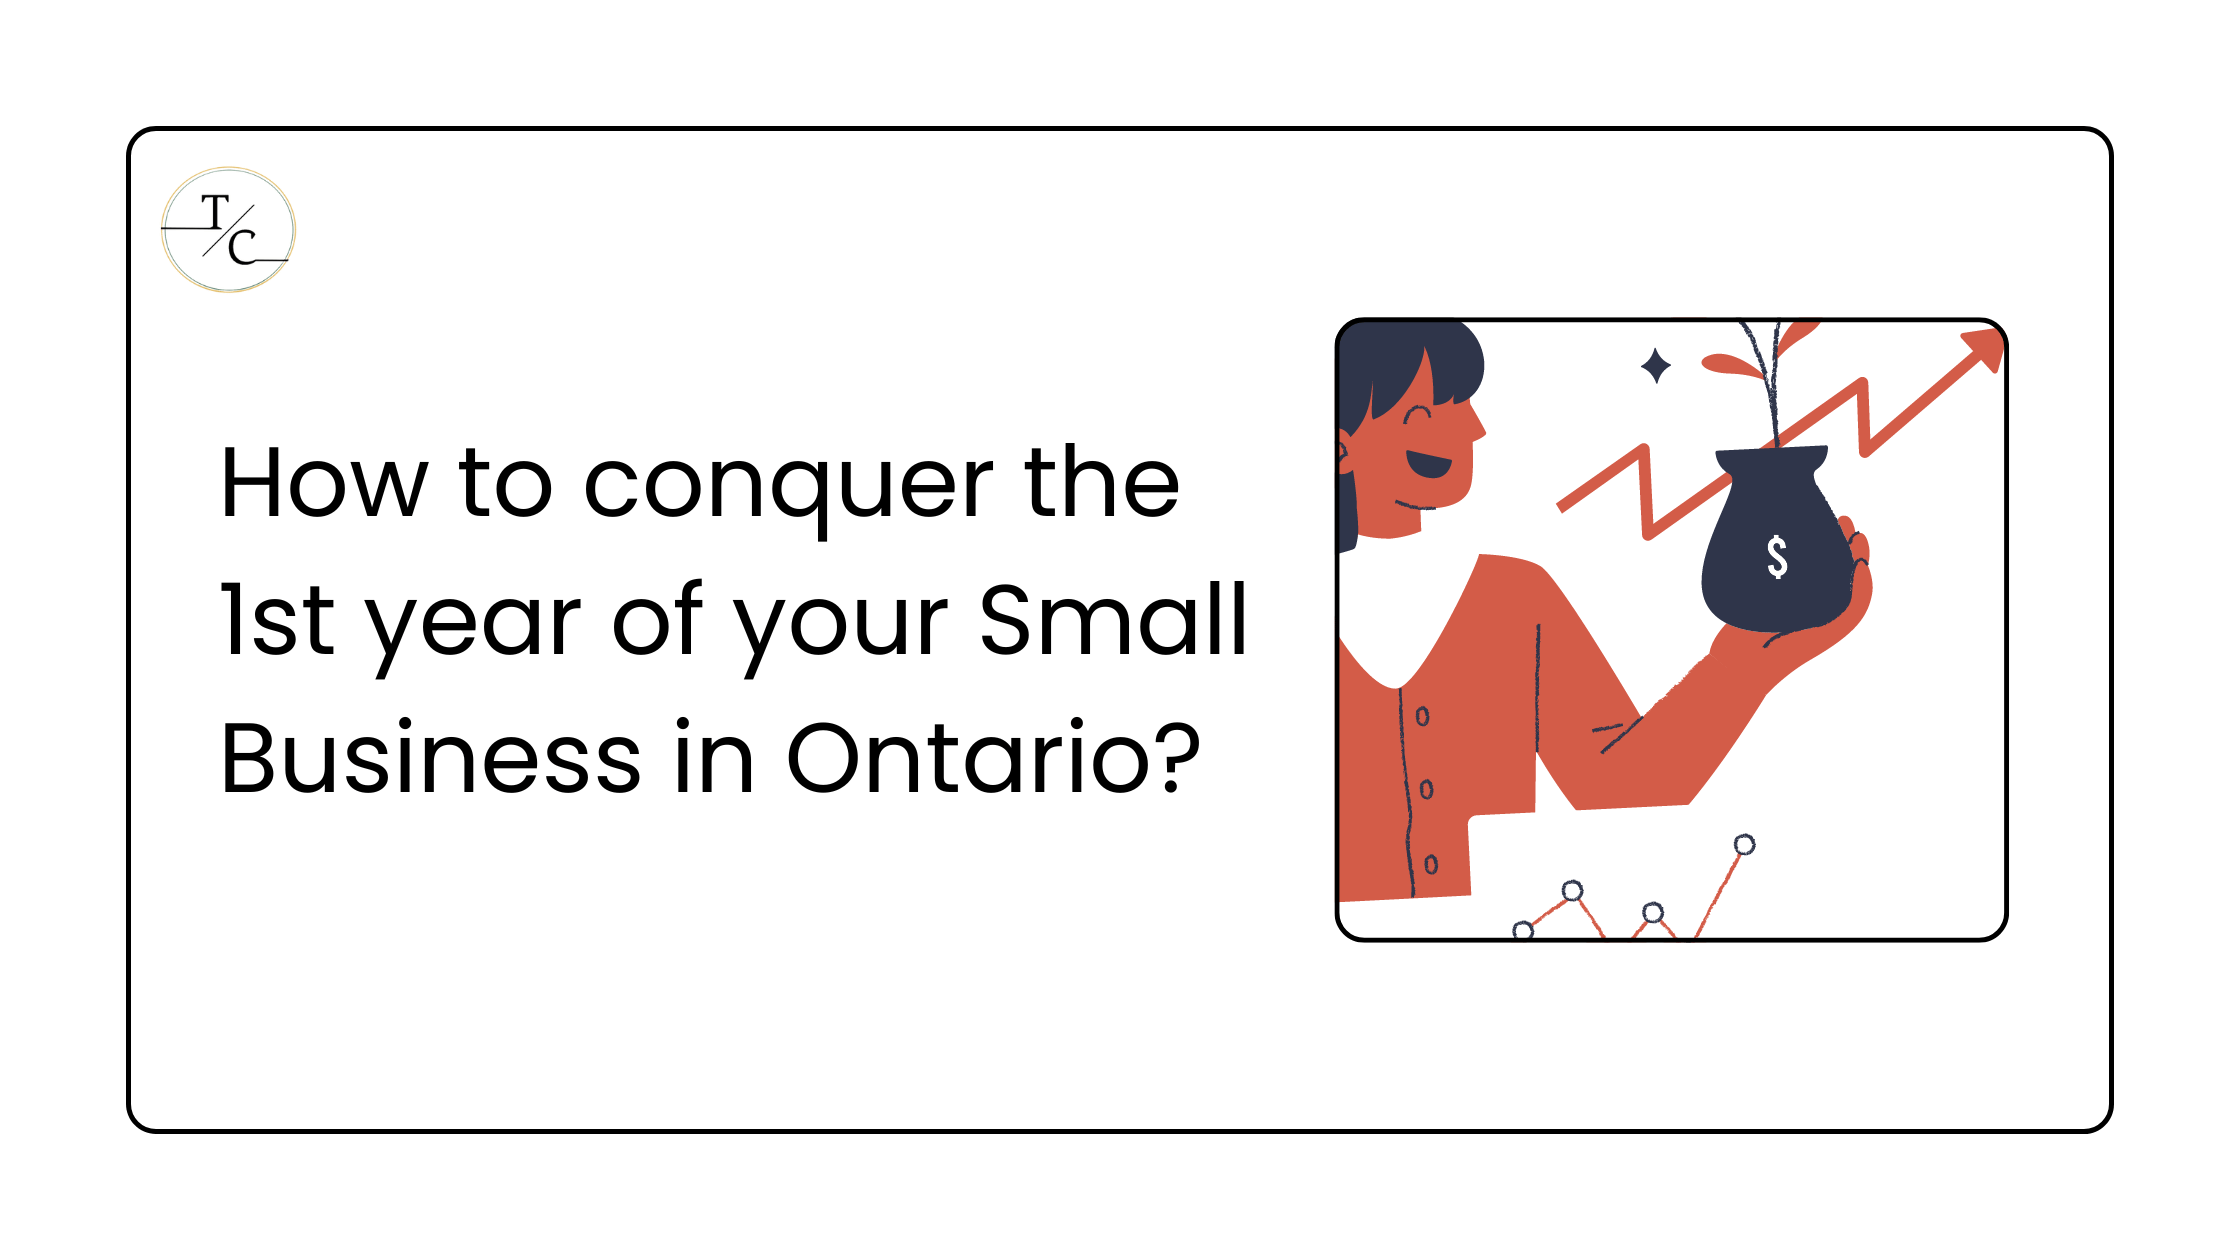 How to measure the success of a Small Business in Ontario